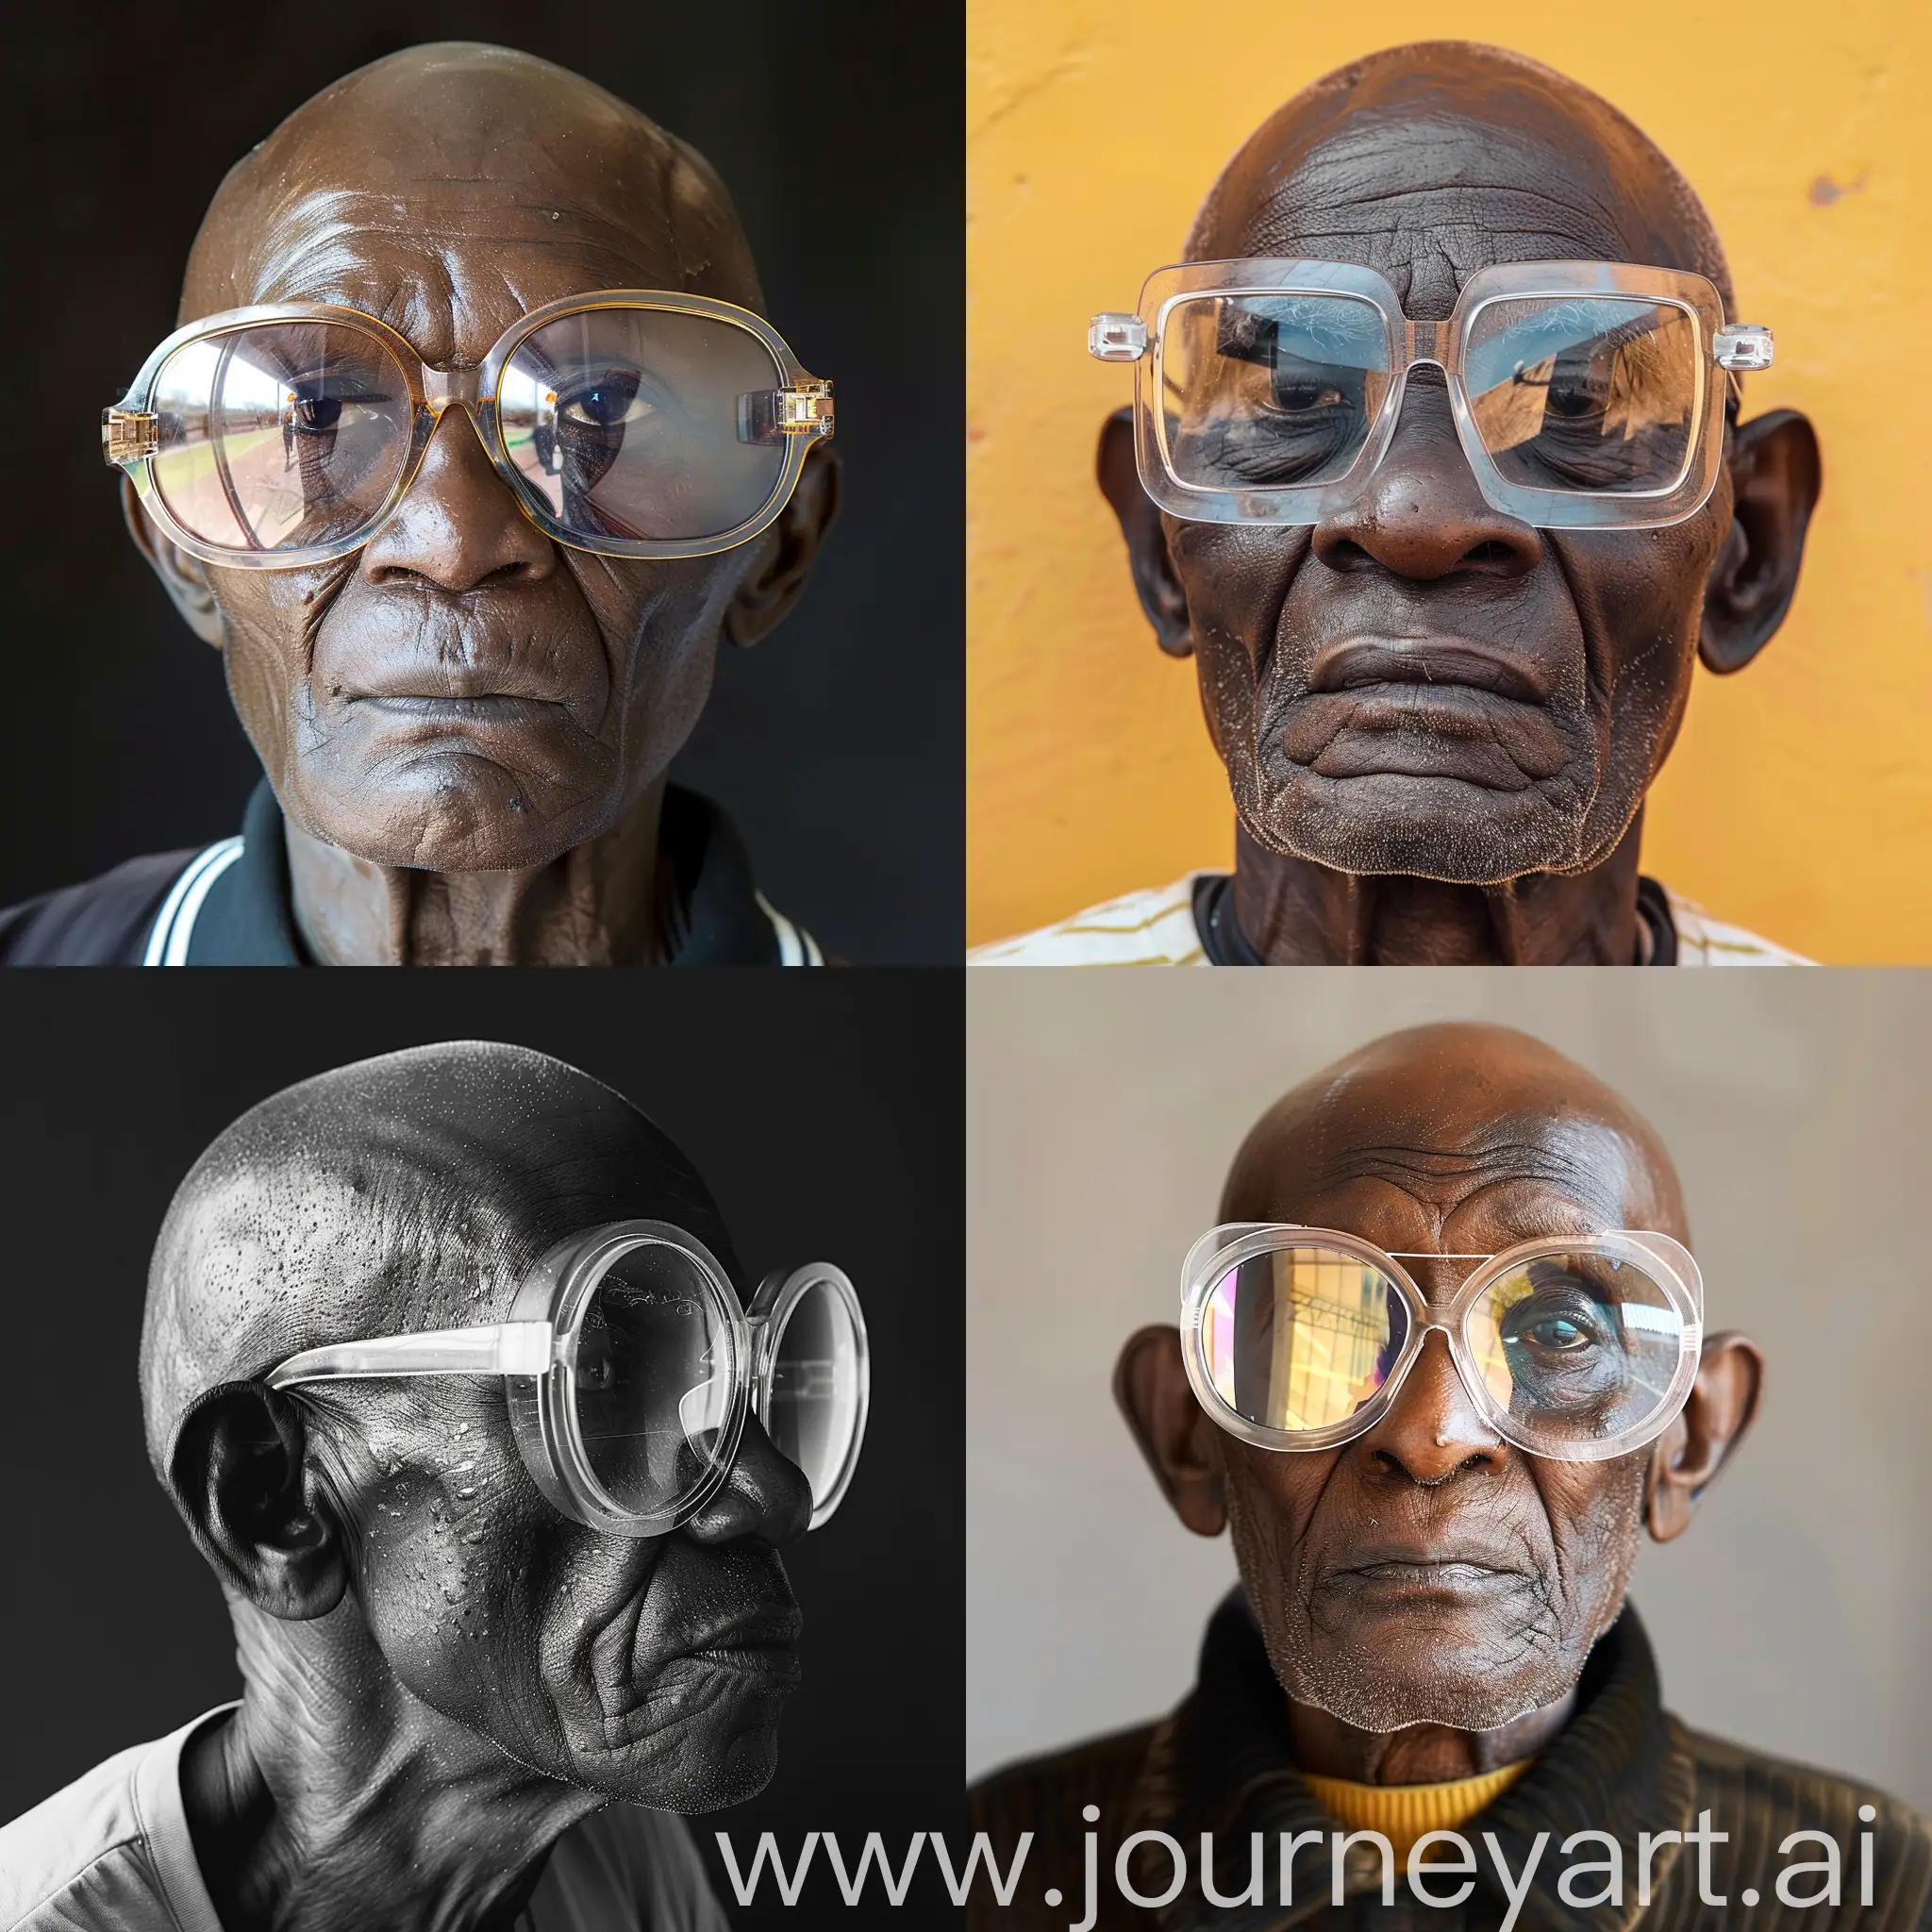 African bald old man wearing thick clear framed and reflective glasses